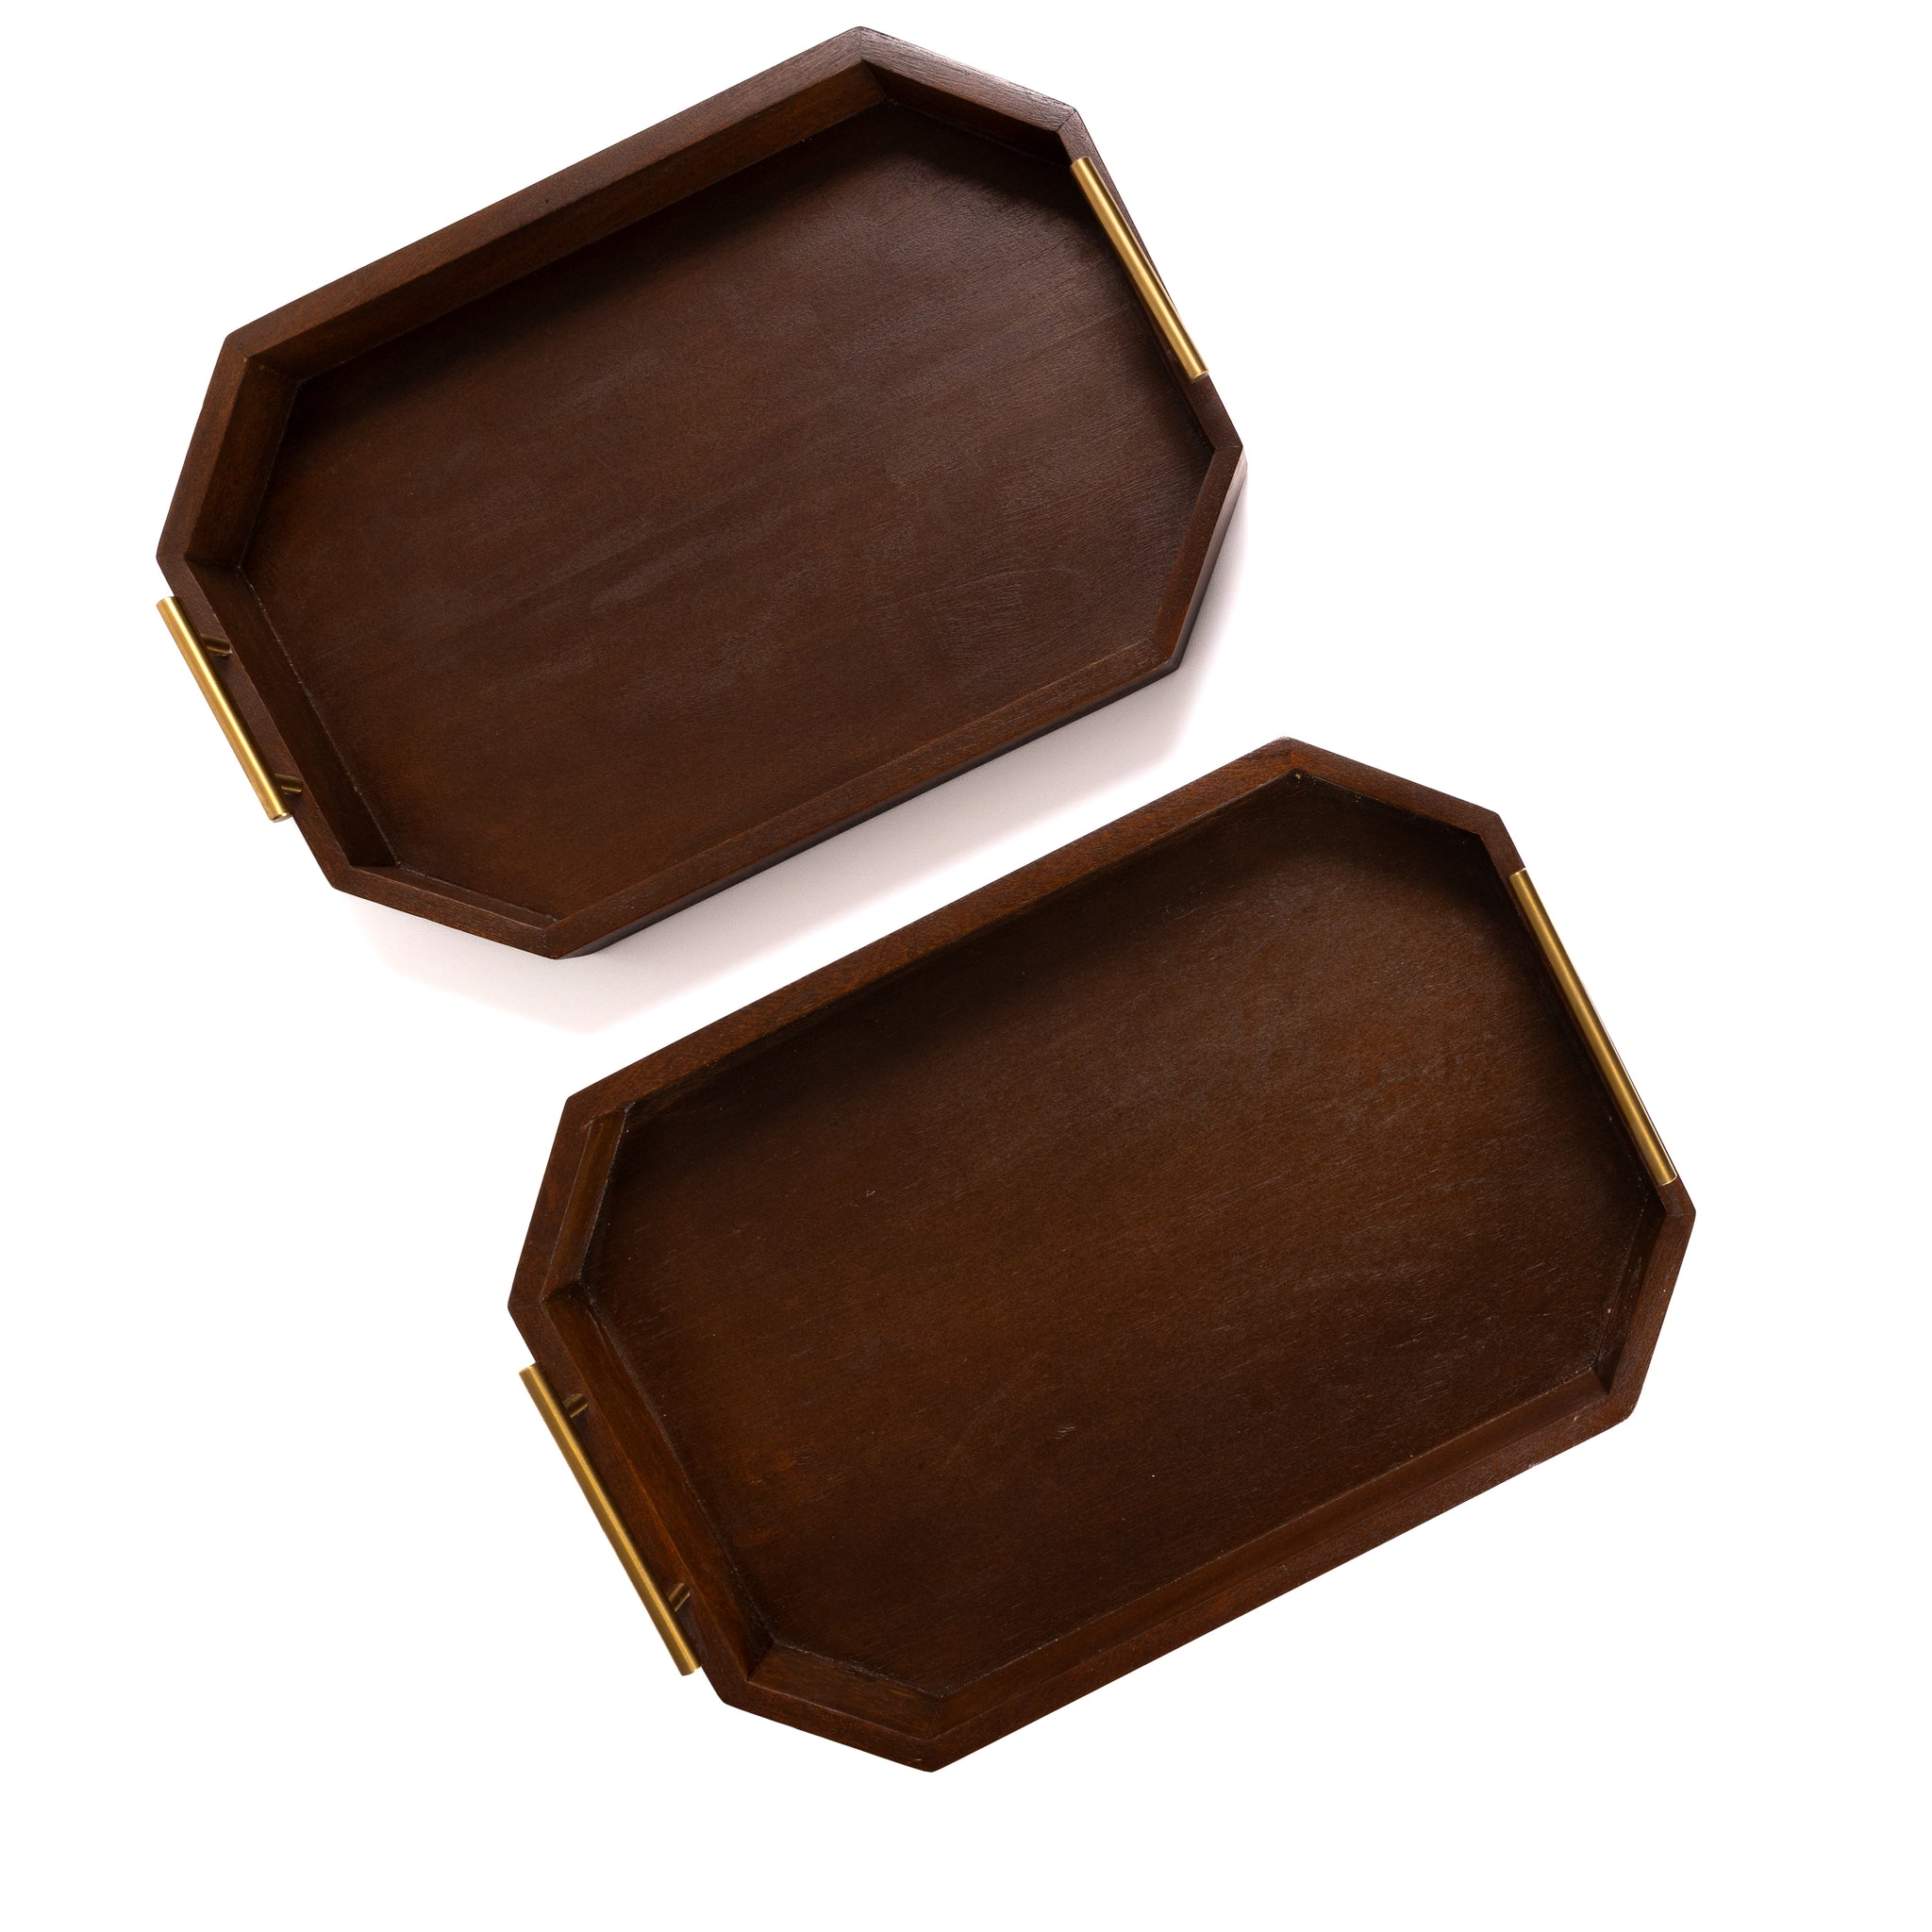 BROWN TRAY IN SOLID WOOD WITH HEXAGONAL PROFILE